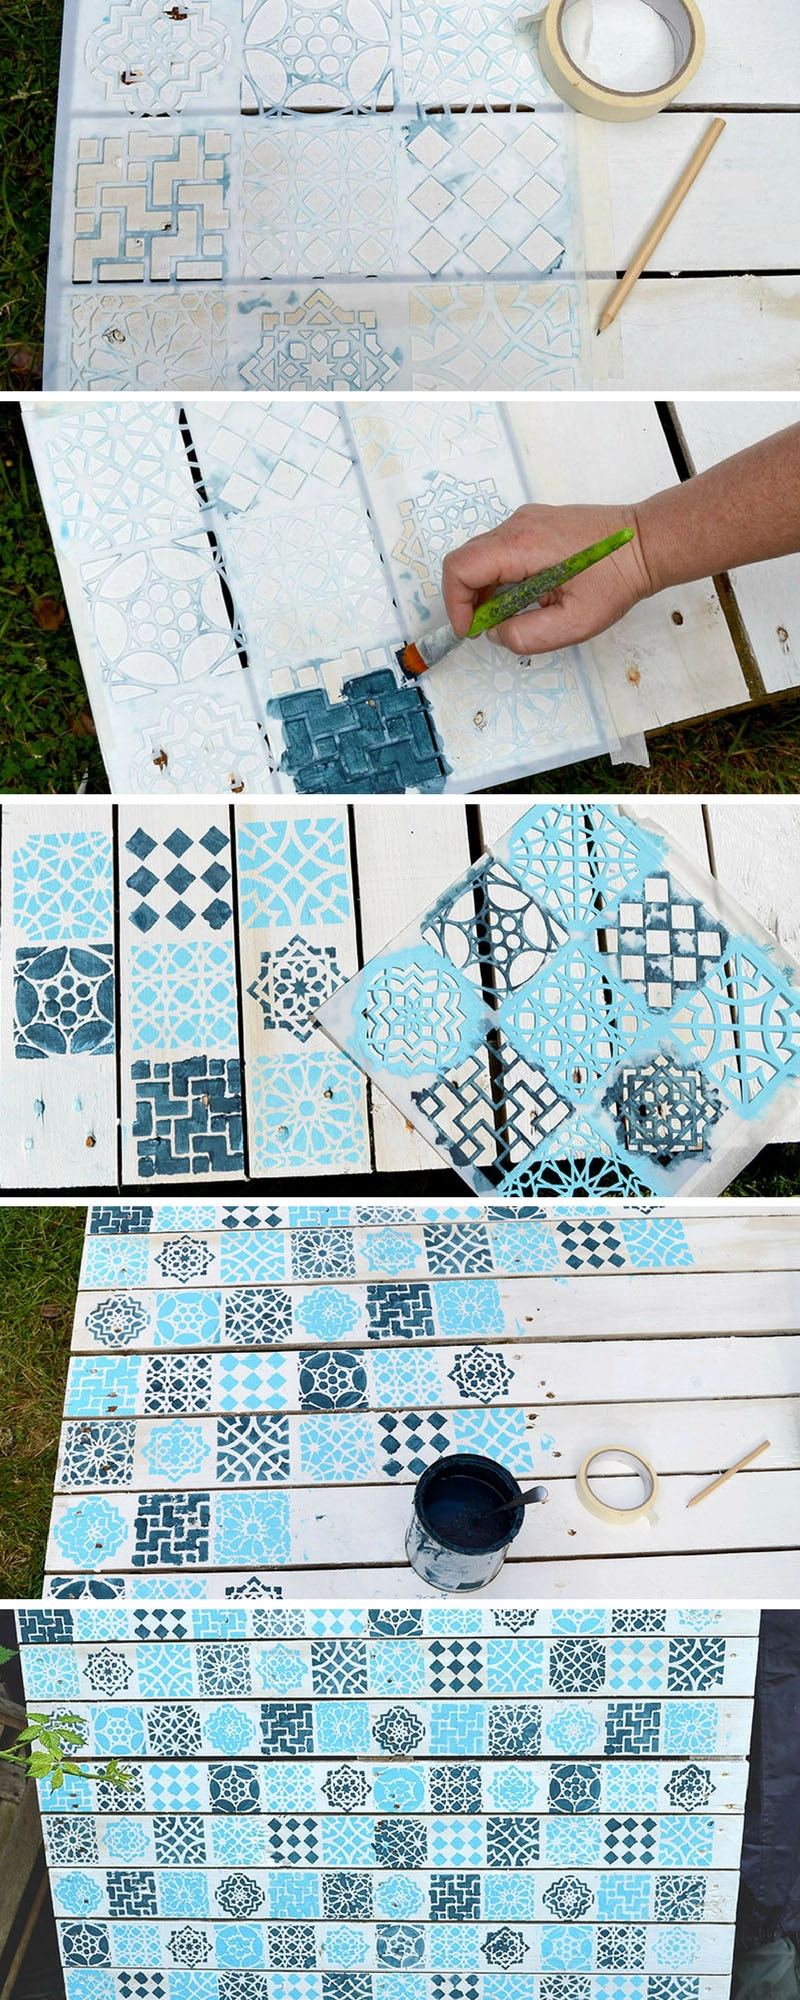 How to create a Moroccan tile style effect on painted wood pallet using a stencil.  To use as a wall planter.